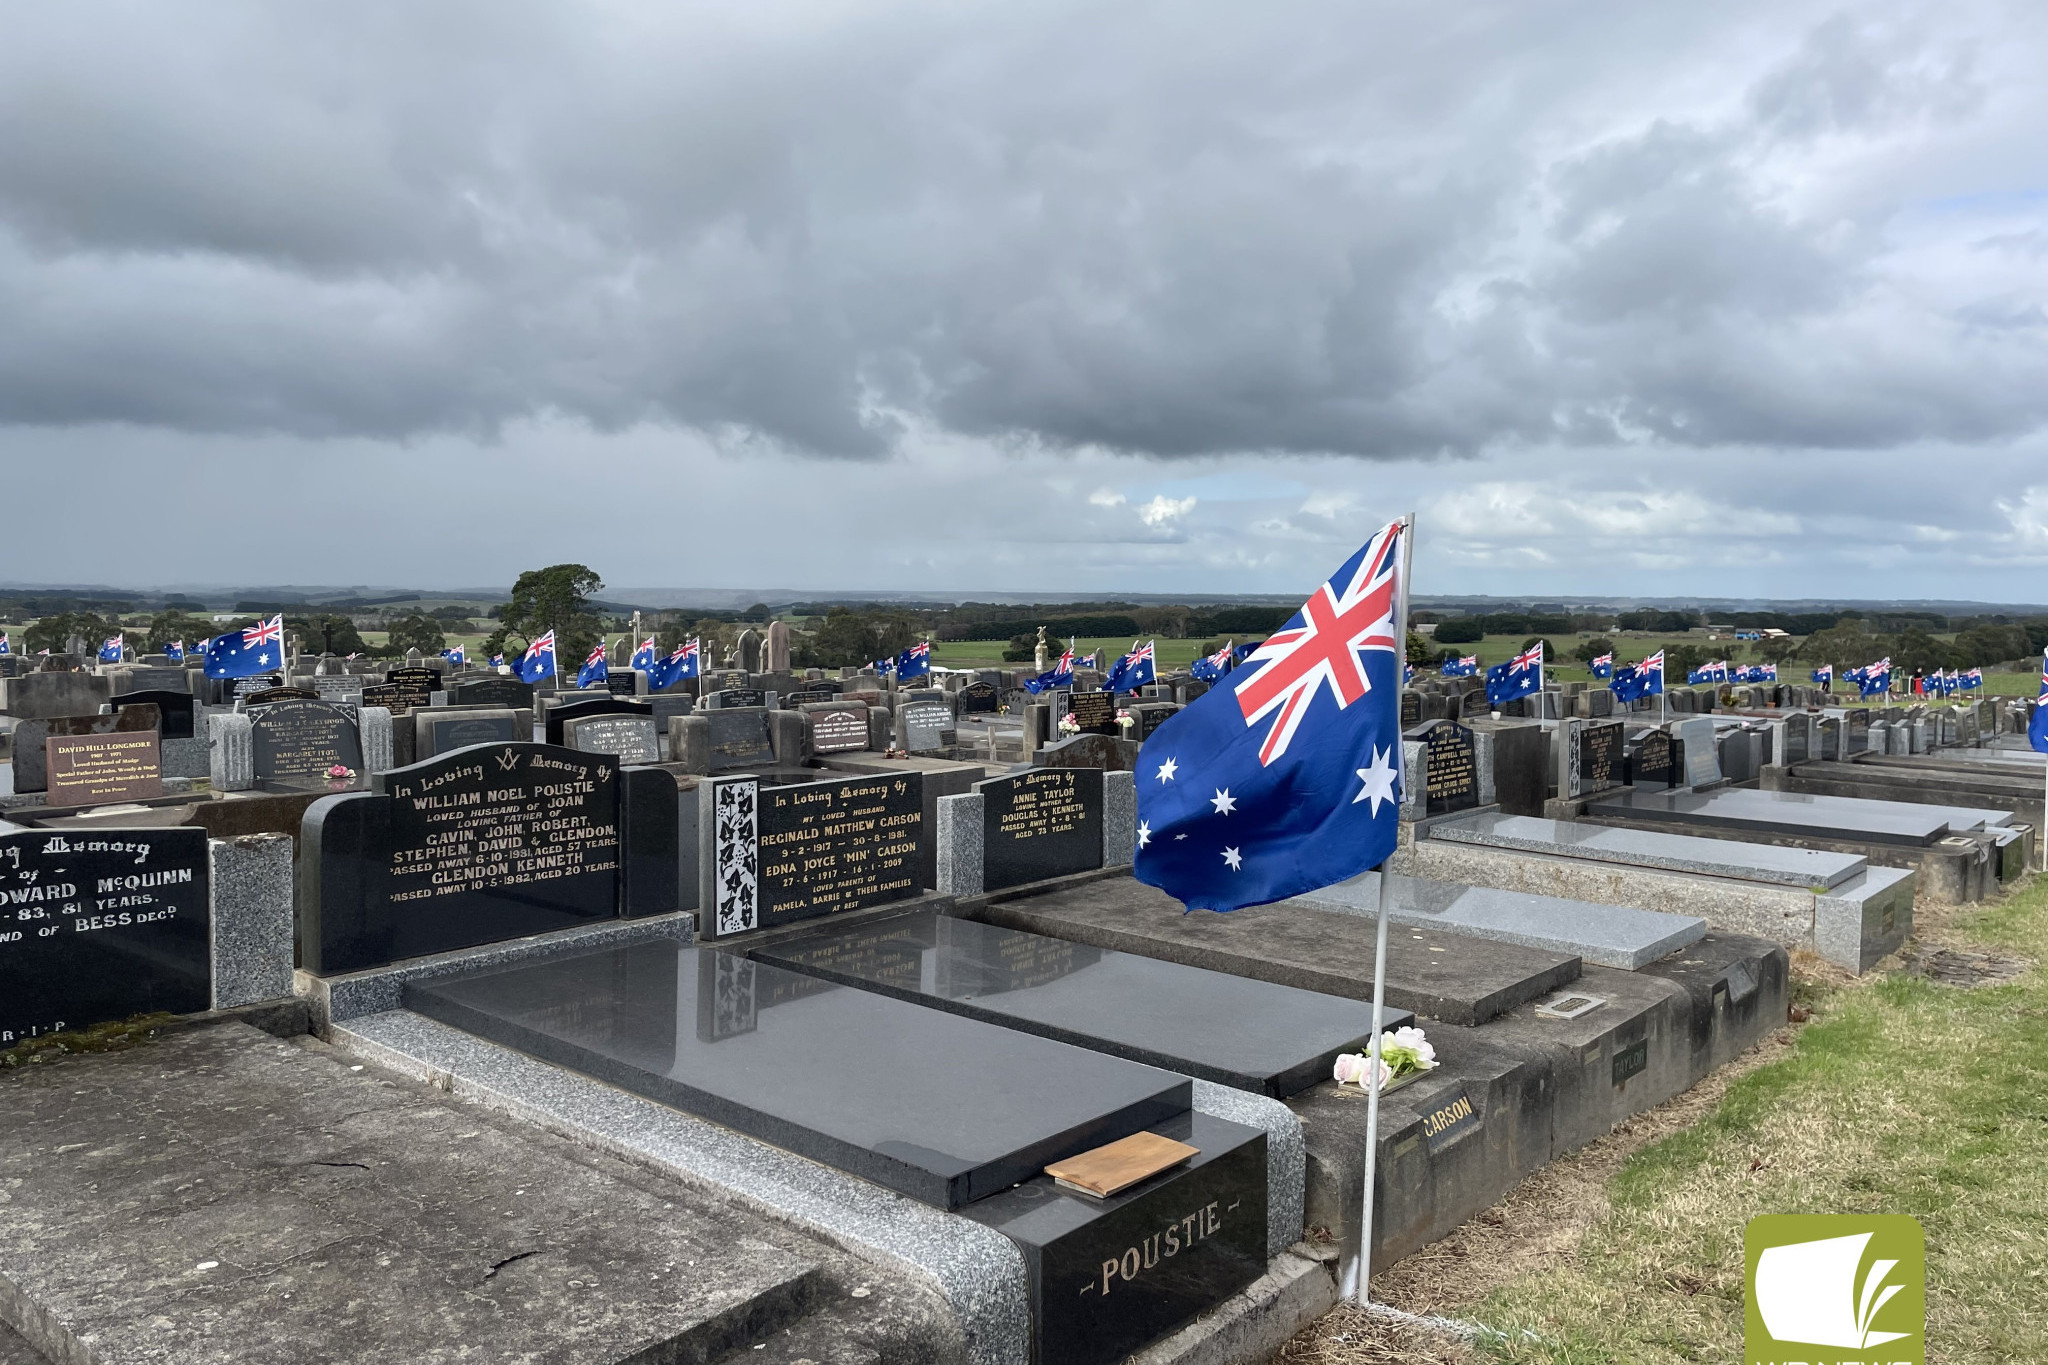 Australian flags were placed beside the graves of more than 95 veterans buried at the Cobden cemetery last week.